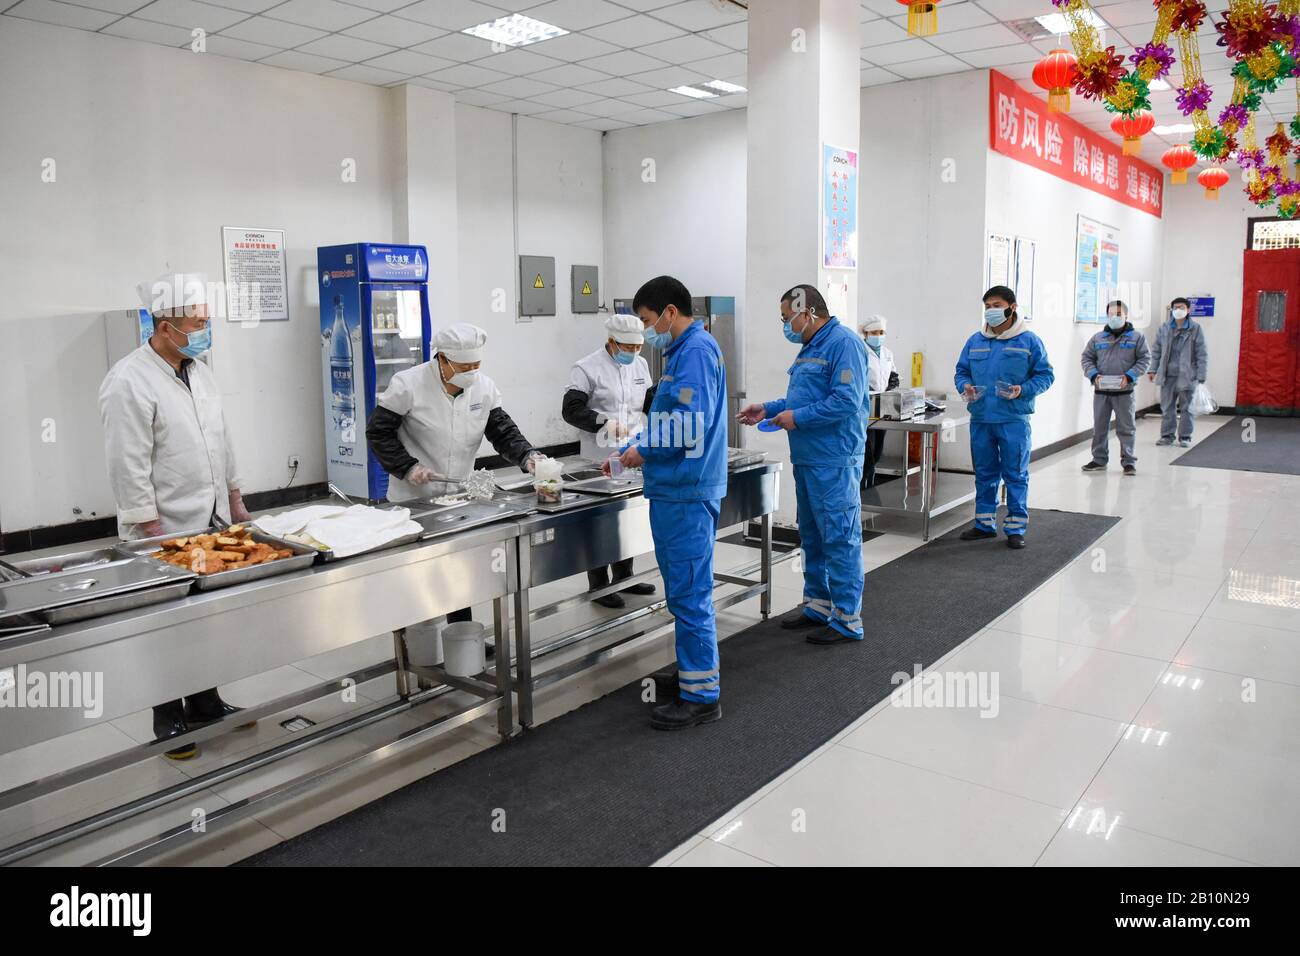 Urumqi, China's Xinjiang Uygur Autonomous Region. 22nd Feb, 2020. Staff members of the Wuhu Conch Profiles and Science Co., Ltd. queue up at a canteen for meals in Urumqi, northwest China's Xinjiang Uygur Autonomous Region, Feb. 22, 2020. Some companies in Urumqi have resumed production amid strict prevention and control measures against the novel coronavirus. Credit: Ding Lei/Xinhua/Alamy Live News Stock Photo